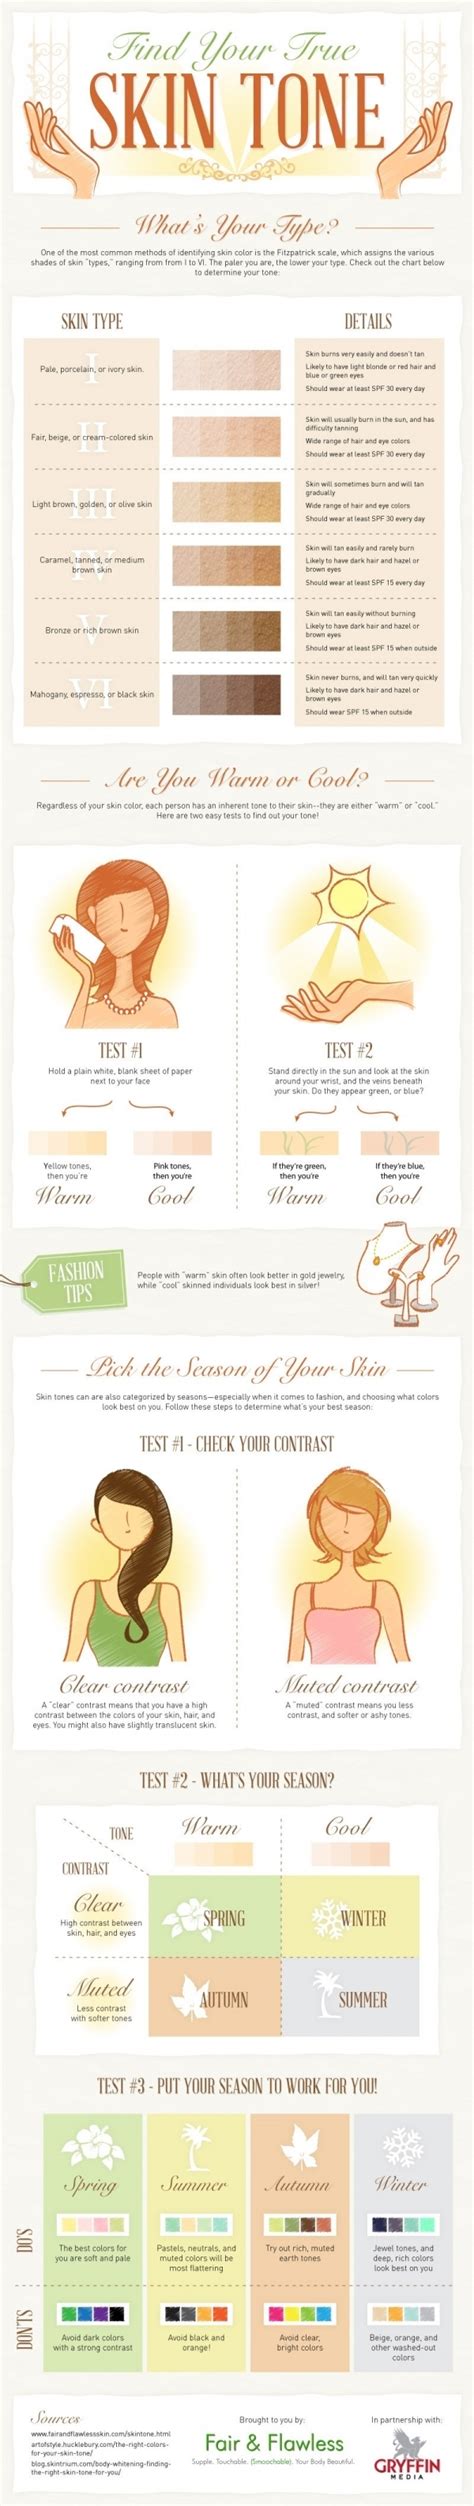 14 How To Find Your True Skin Tone 38 Helpful Beauty Infographics